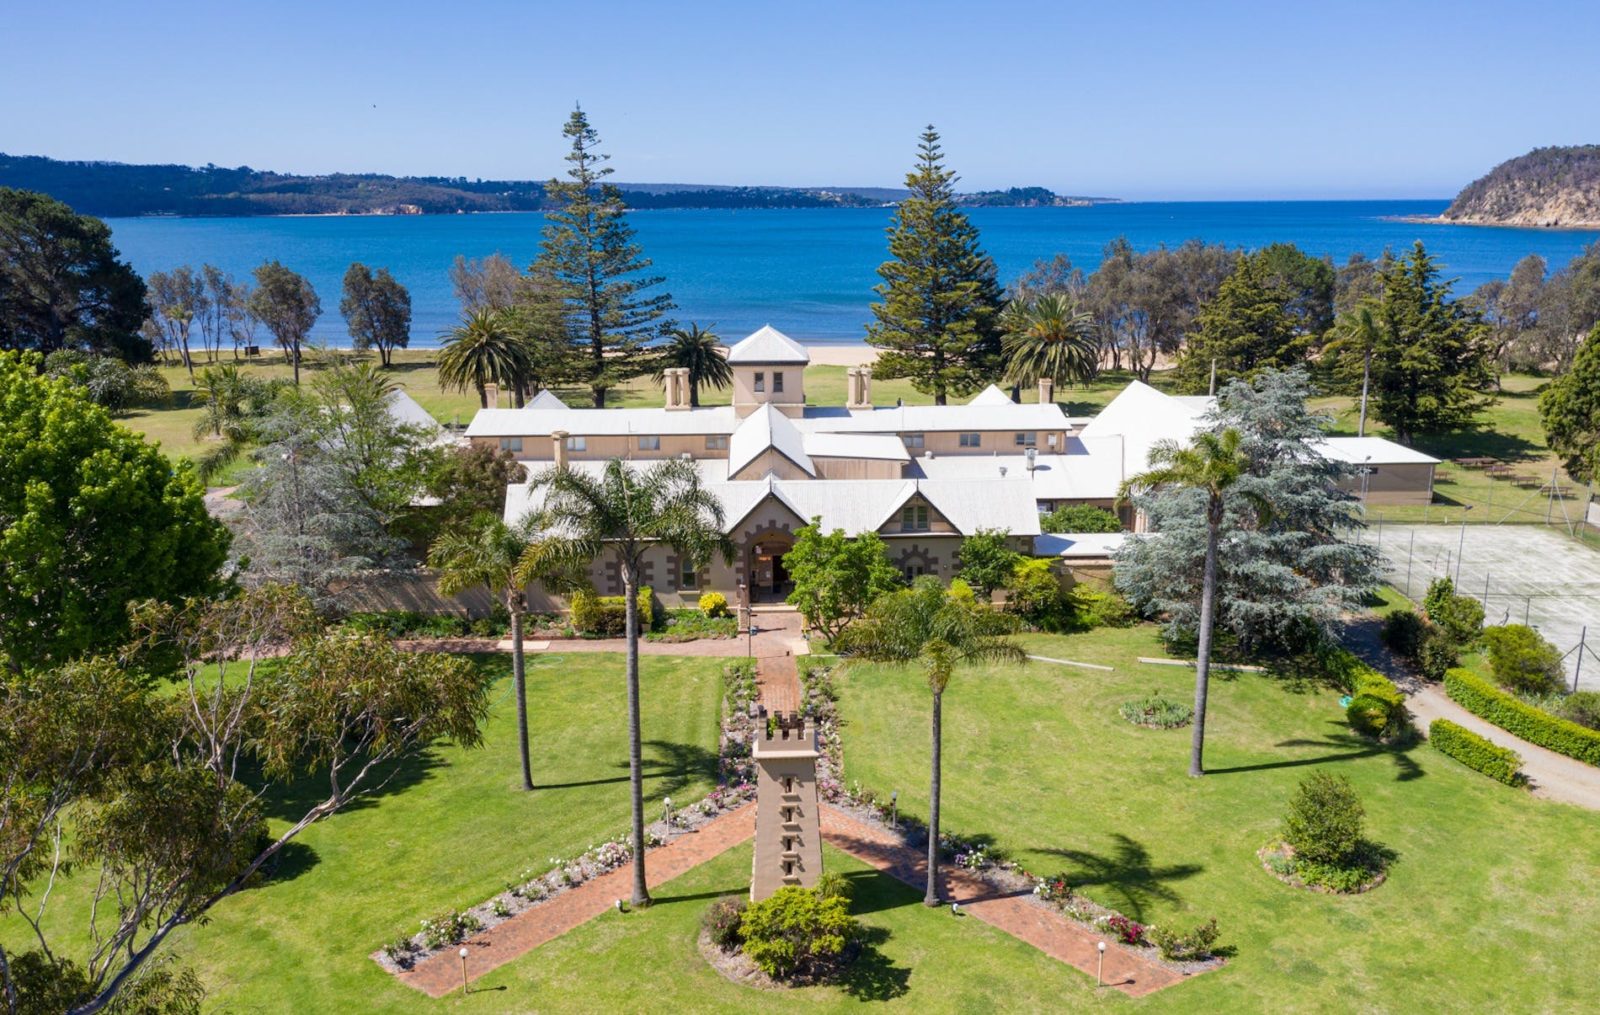 Beautiful and magical, the Seahorse Inn on the shores of Twofold Bay